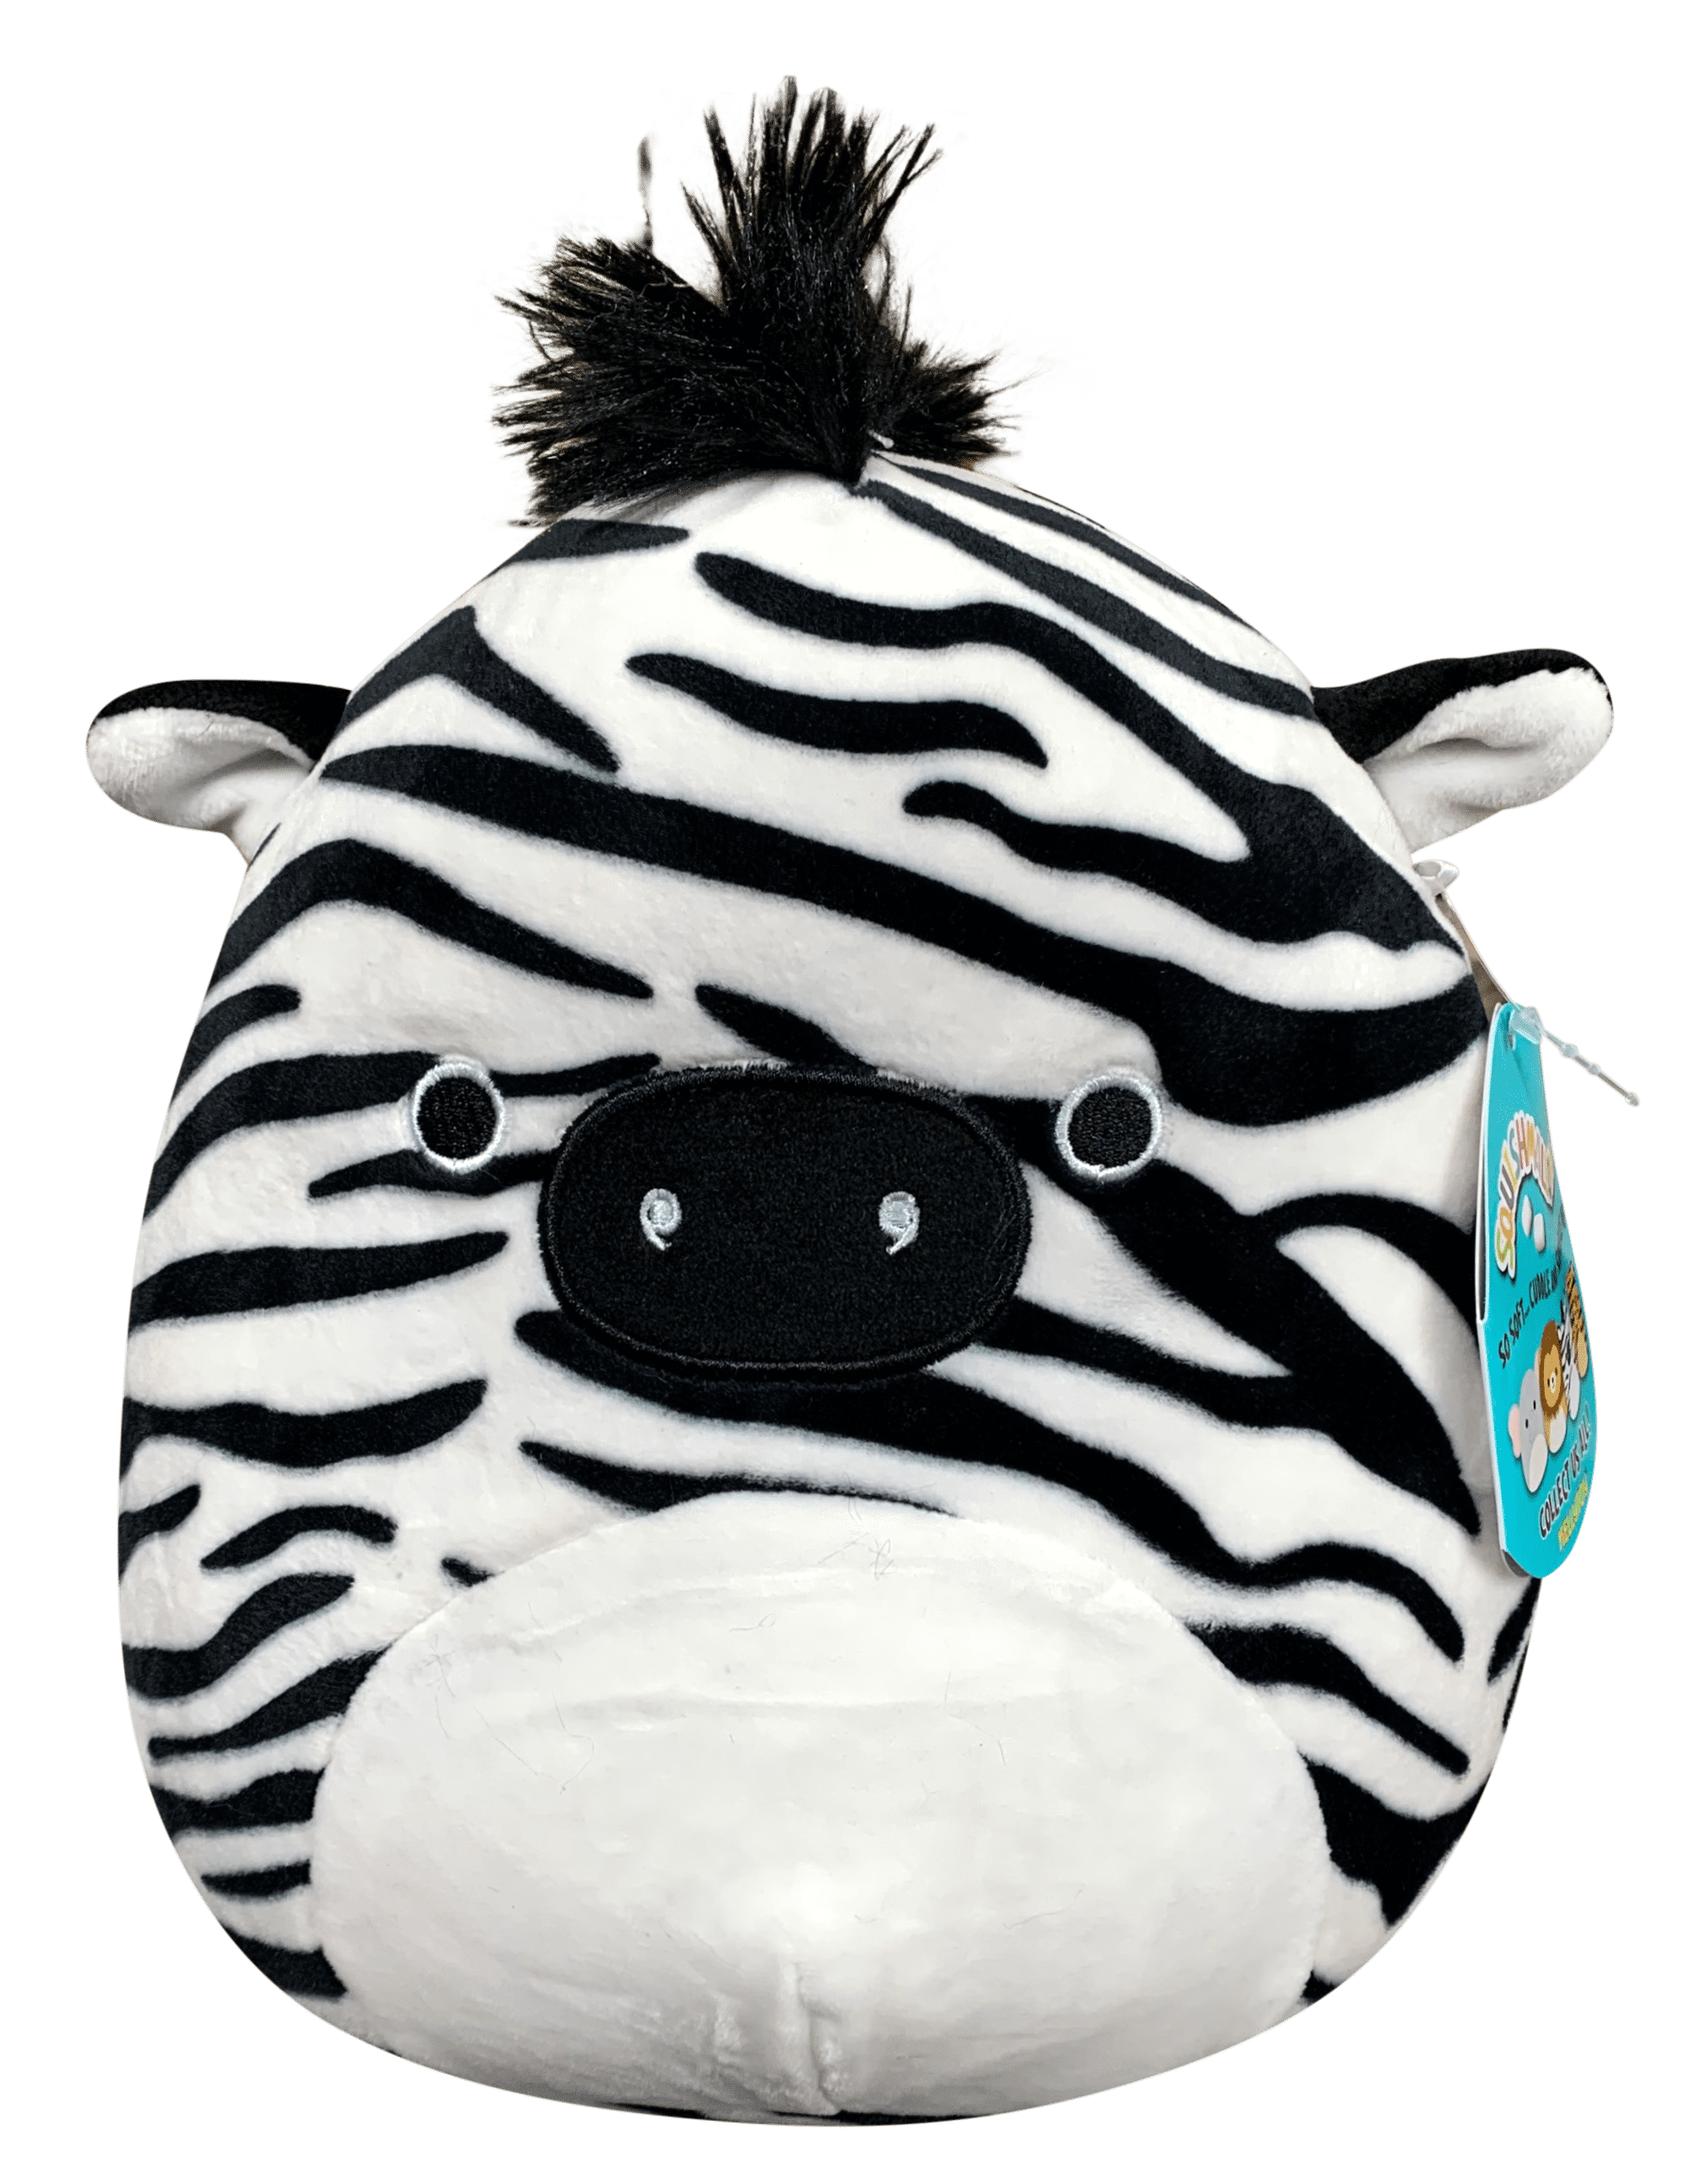 Super Soft Stuffed animal Details about   ☆New☆ Squishmallow 16" Zebra Black and white striped 